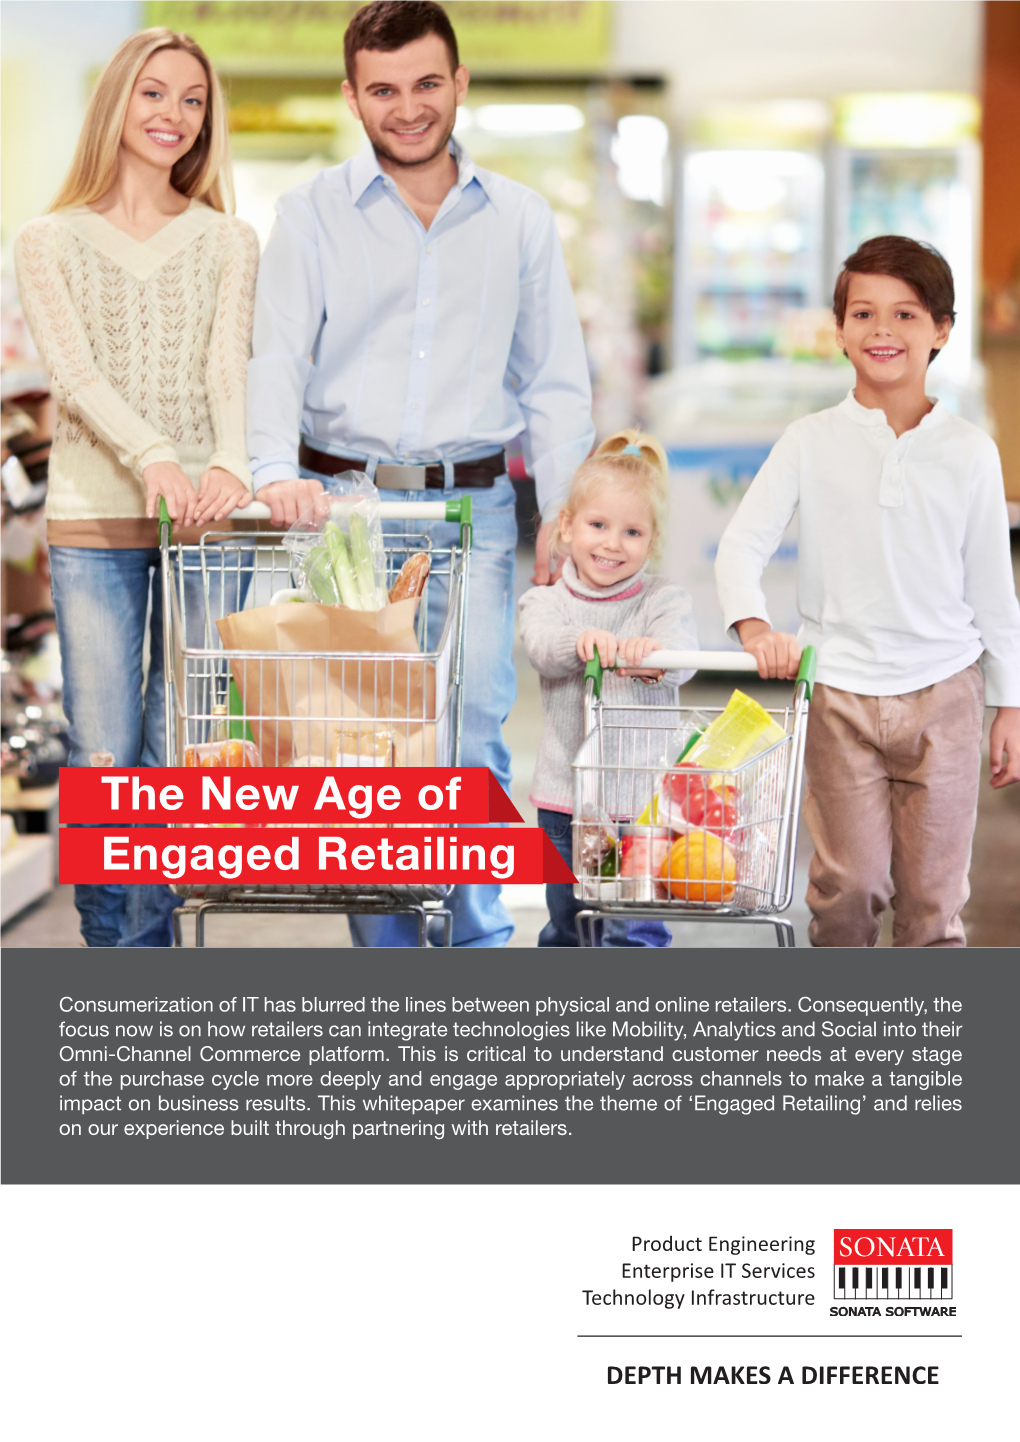 The New Age of Engaged Retailing